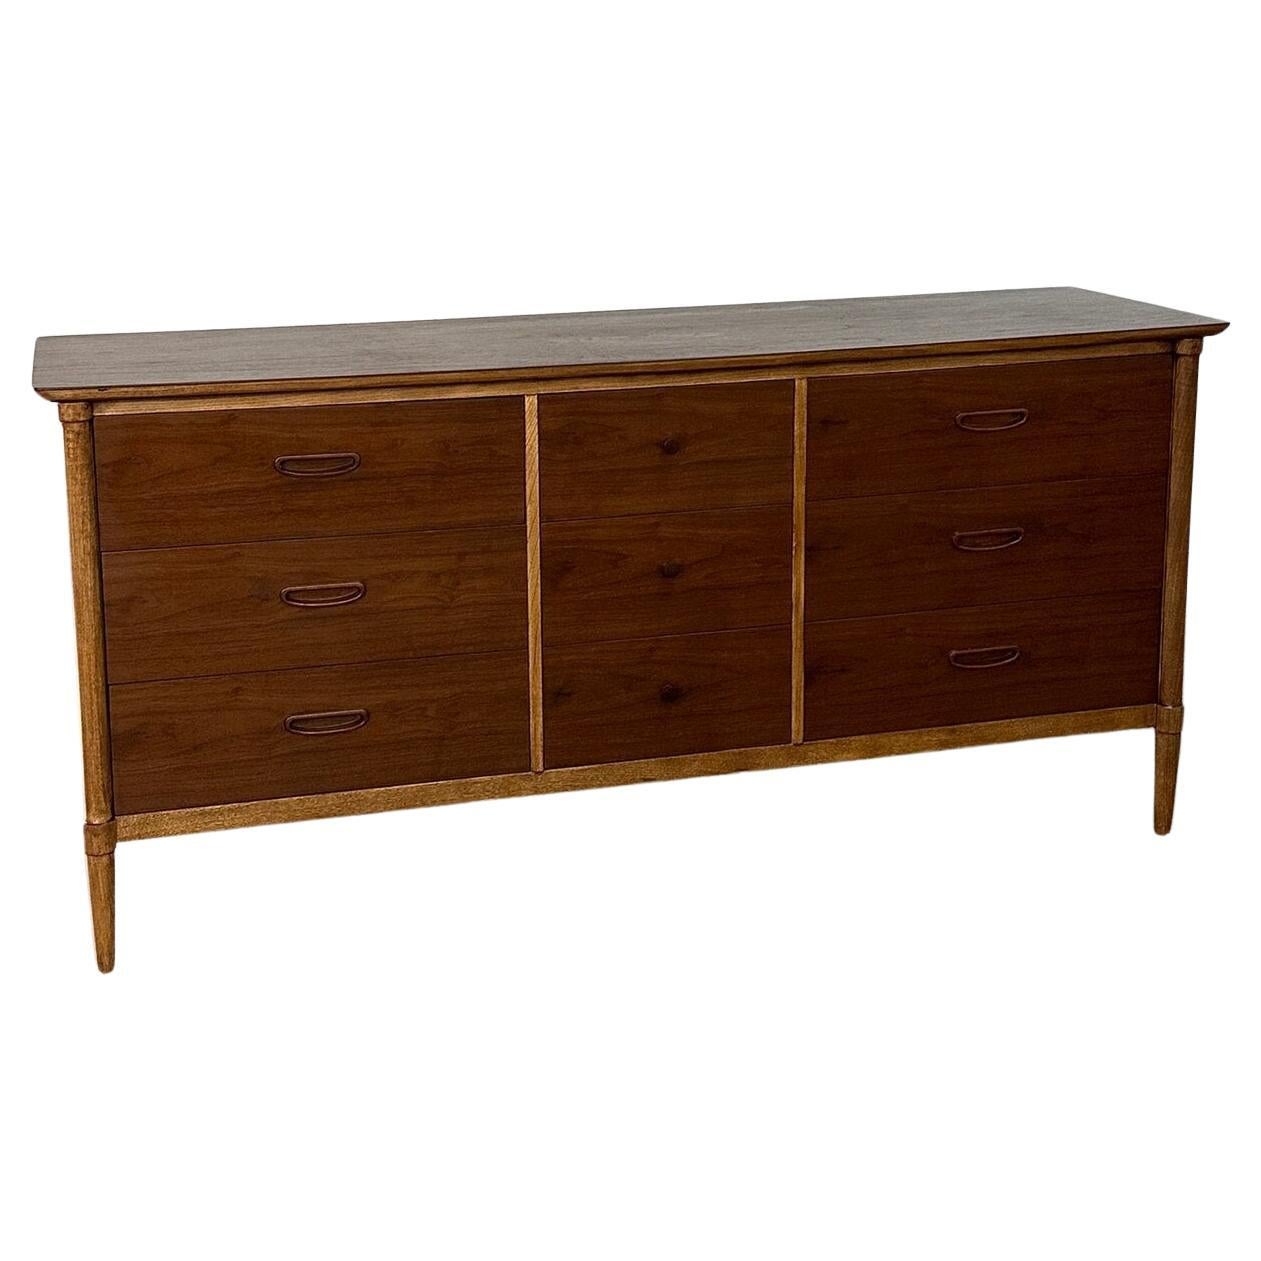 Two tone dresser by Lane For Sale